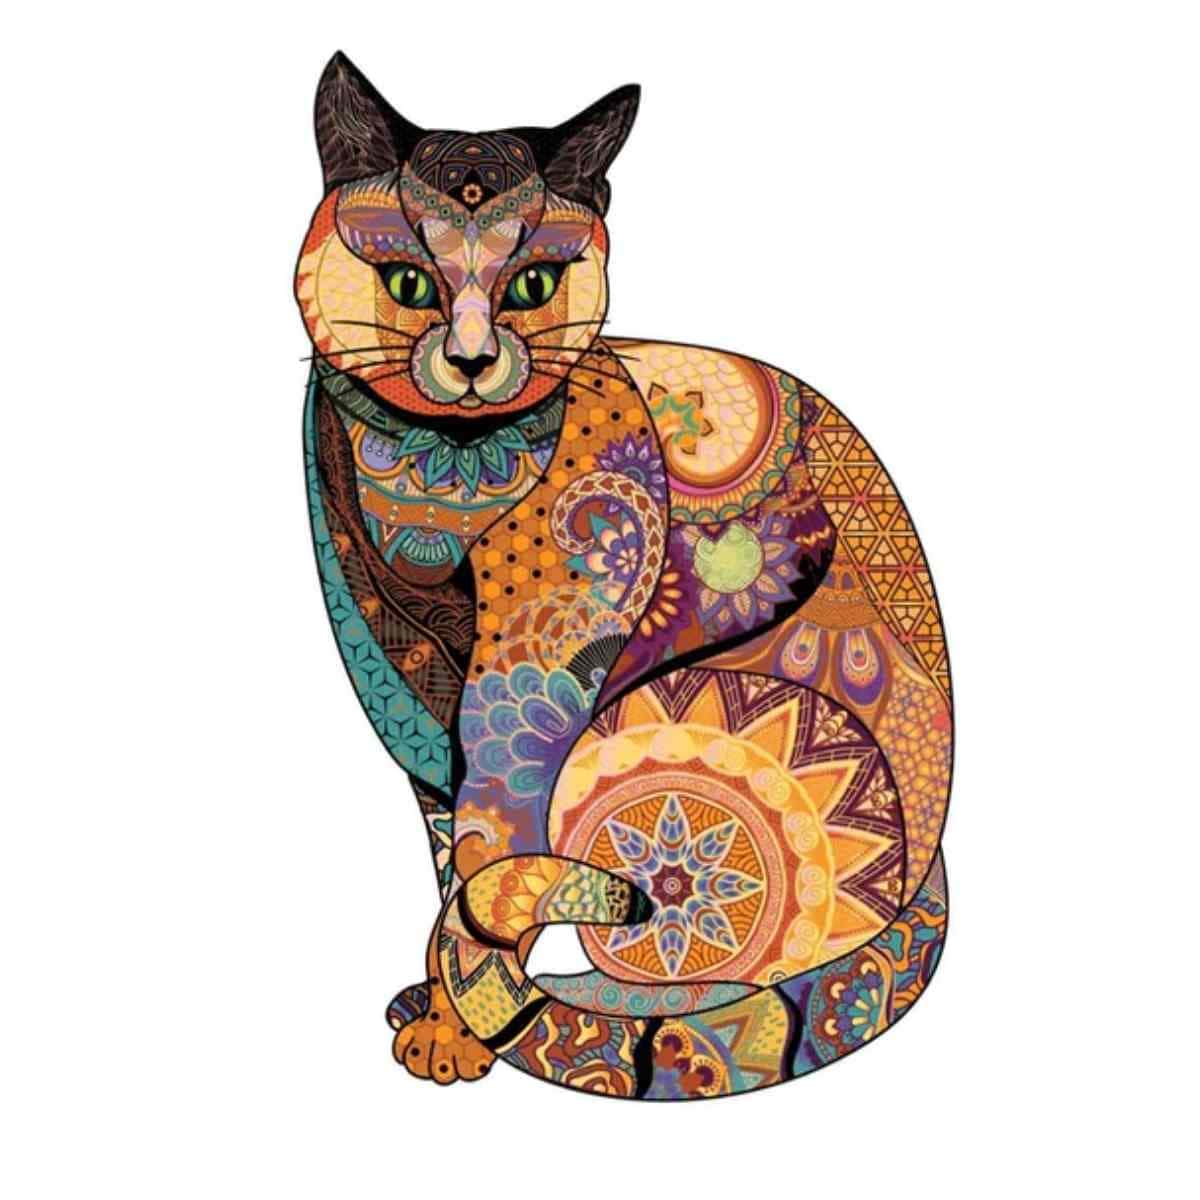 A5/Small Cat Inspired By Klimt - Wooden Jigsaw Puzzle